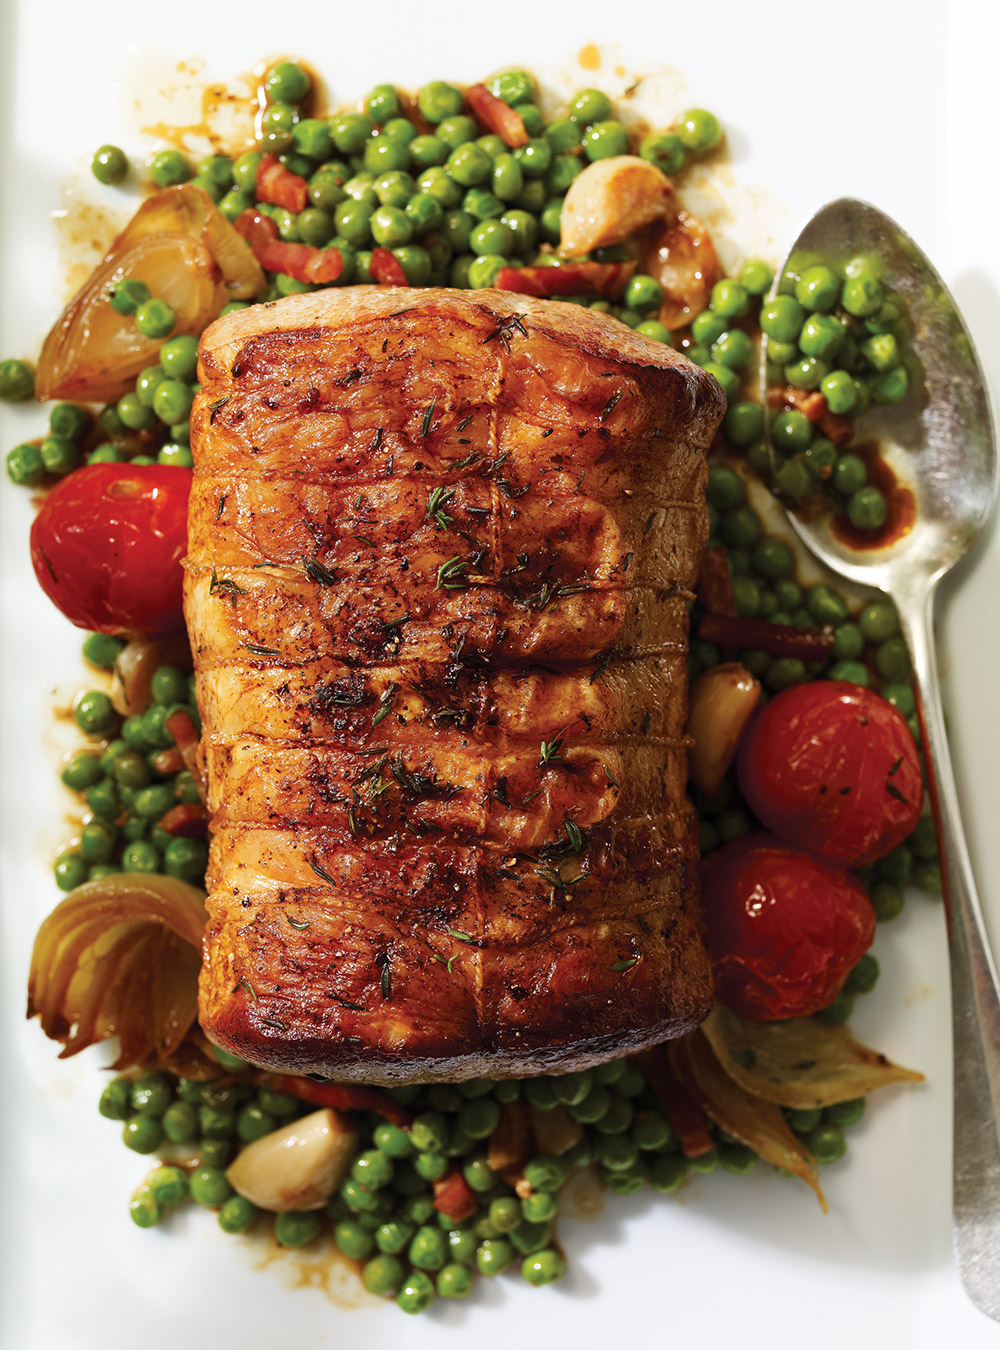 Pork Roast with Cherry Tomatoes and Green Peas